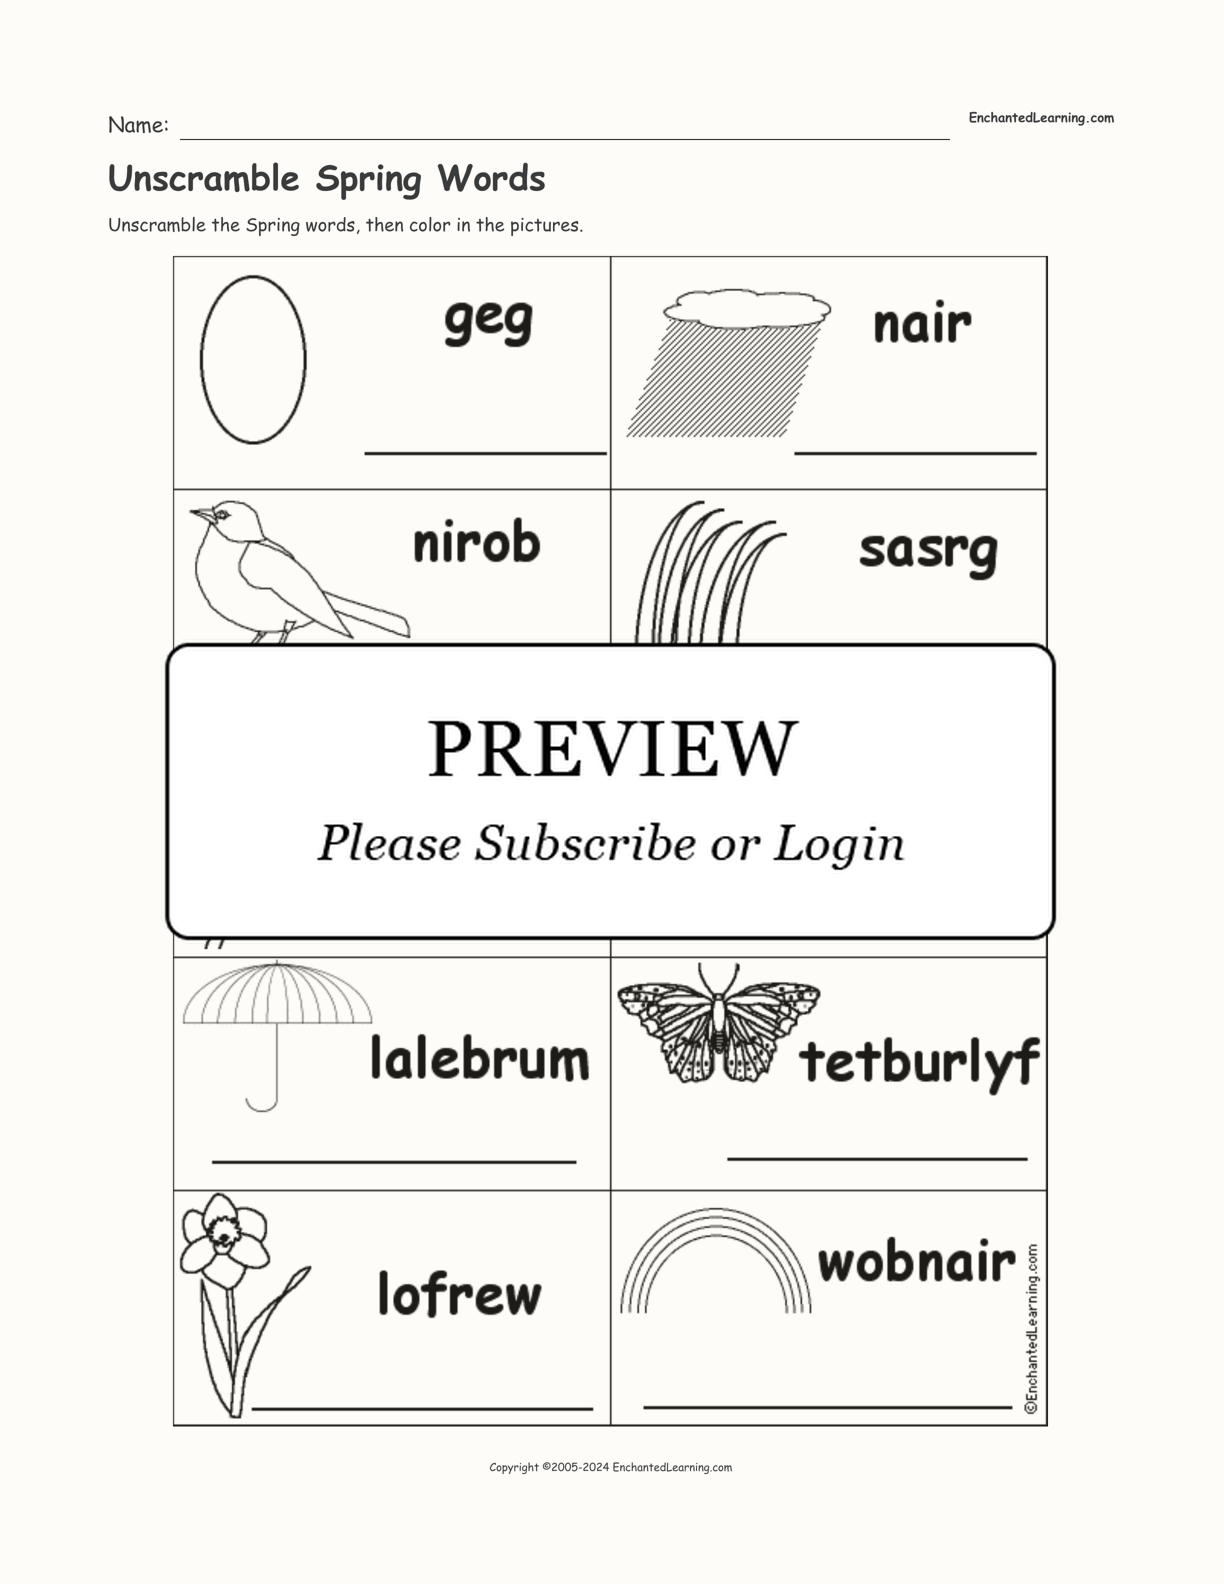 Unscramble Spring Words interactive worksheet page 1